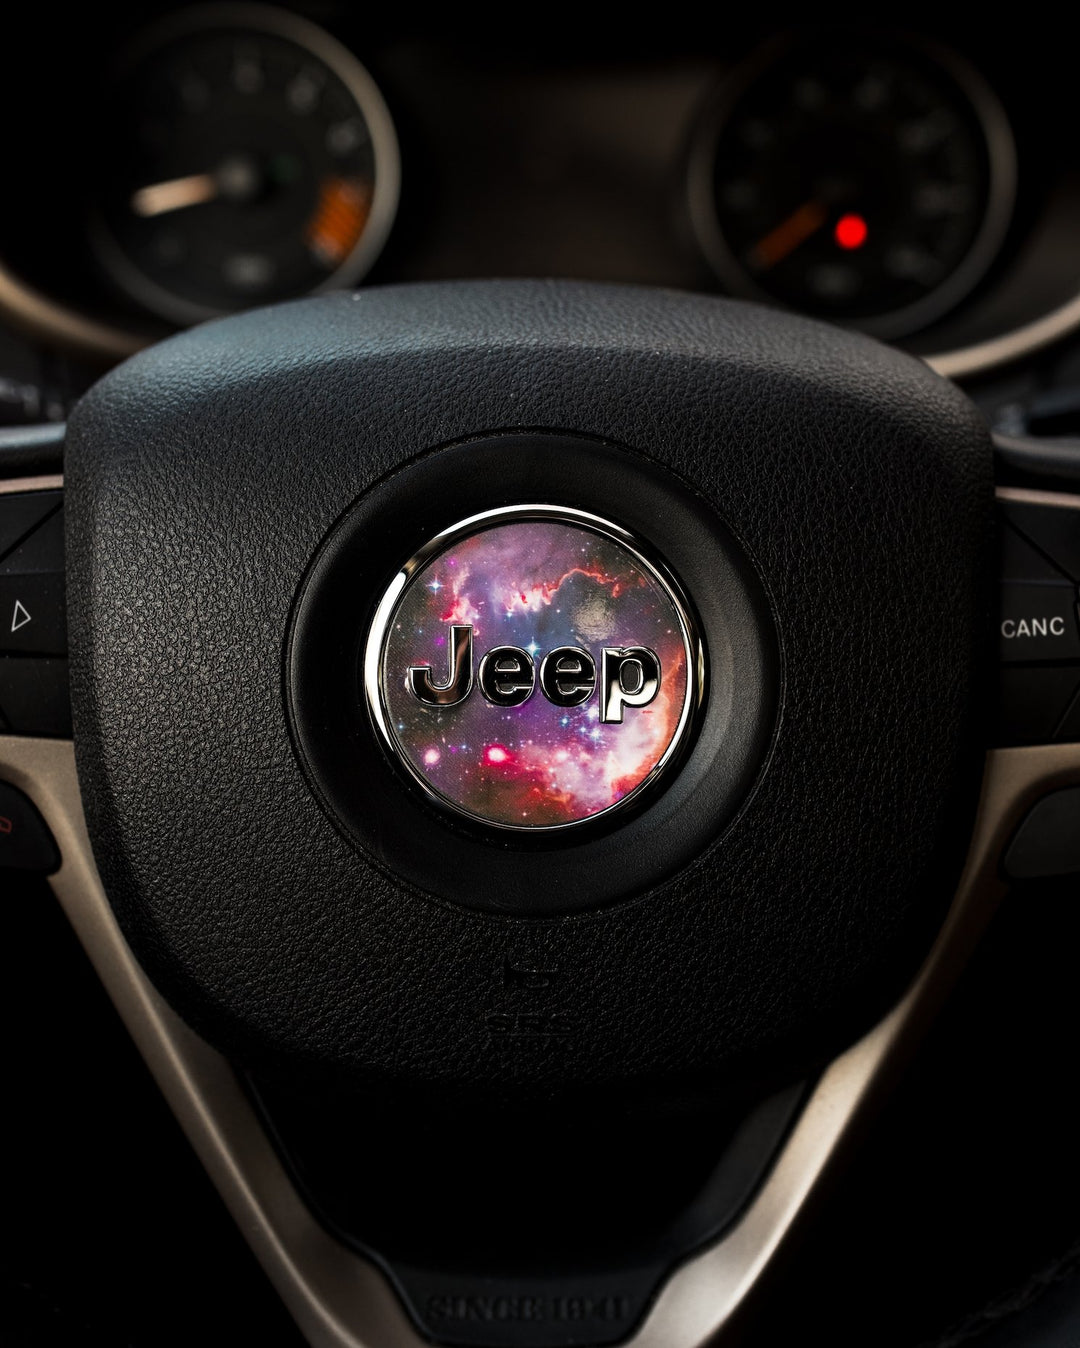 Galaxy Print Steering Wheel Decal for Jeep